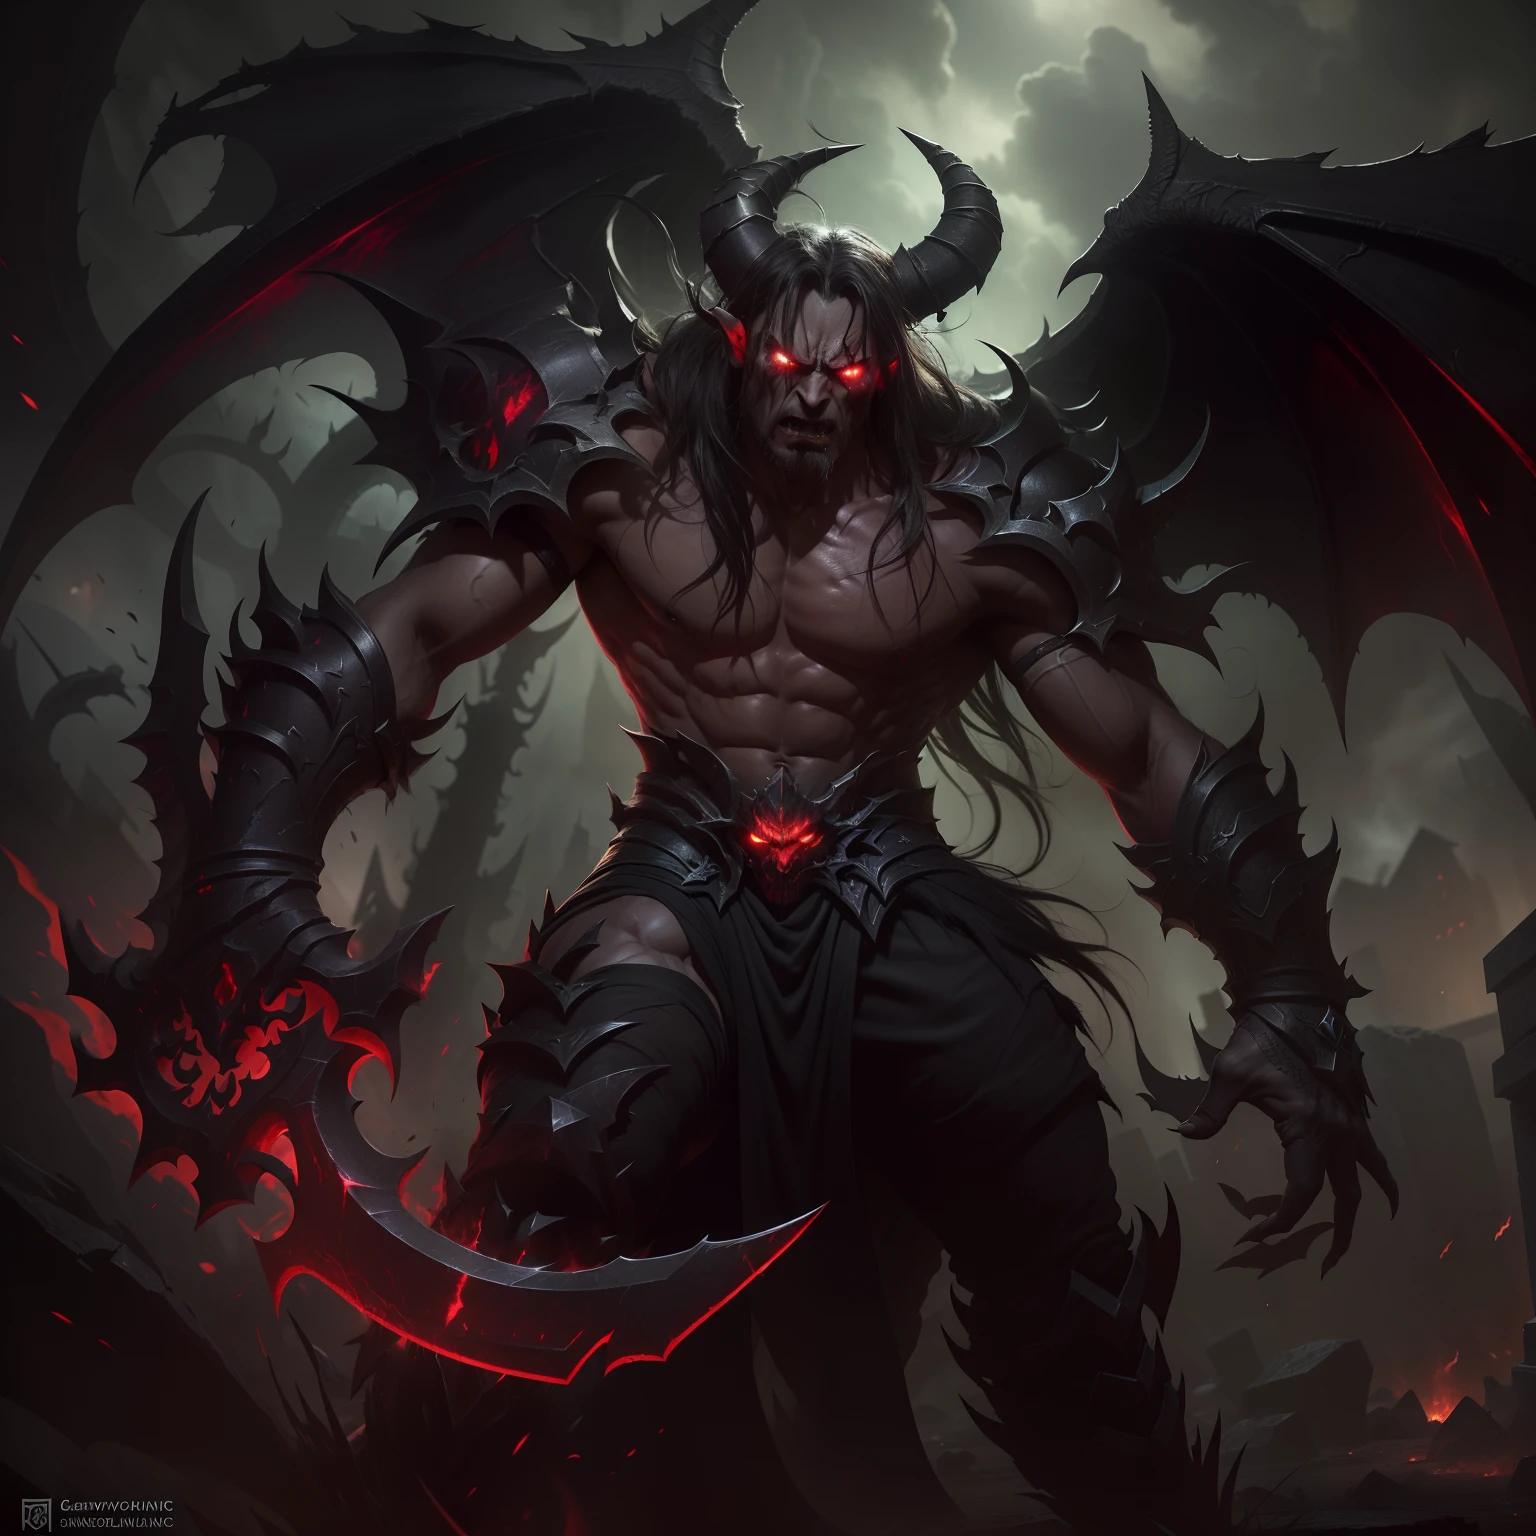 (Best quality, Detailed),(dark and angry,graveleux:1.3,sombre:1.2),ILLIDAN, World of Warcraft,
(Demonic wings, cornes pointues:1.3,dark red skin),two blades of Azzinoth,dark eyes,sinistre, regard intense, background dark, Volumetric light hyper realistic super detailed Dynamic pose